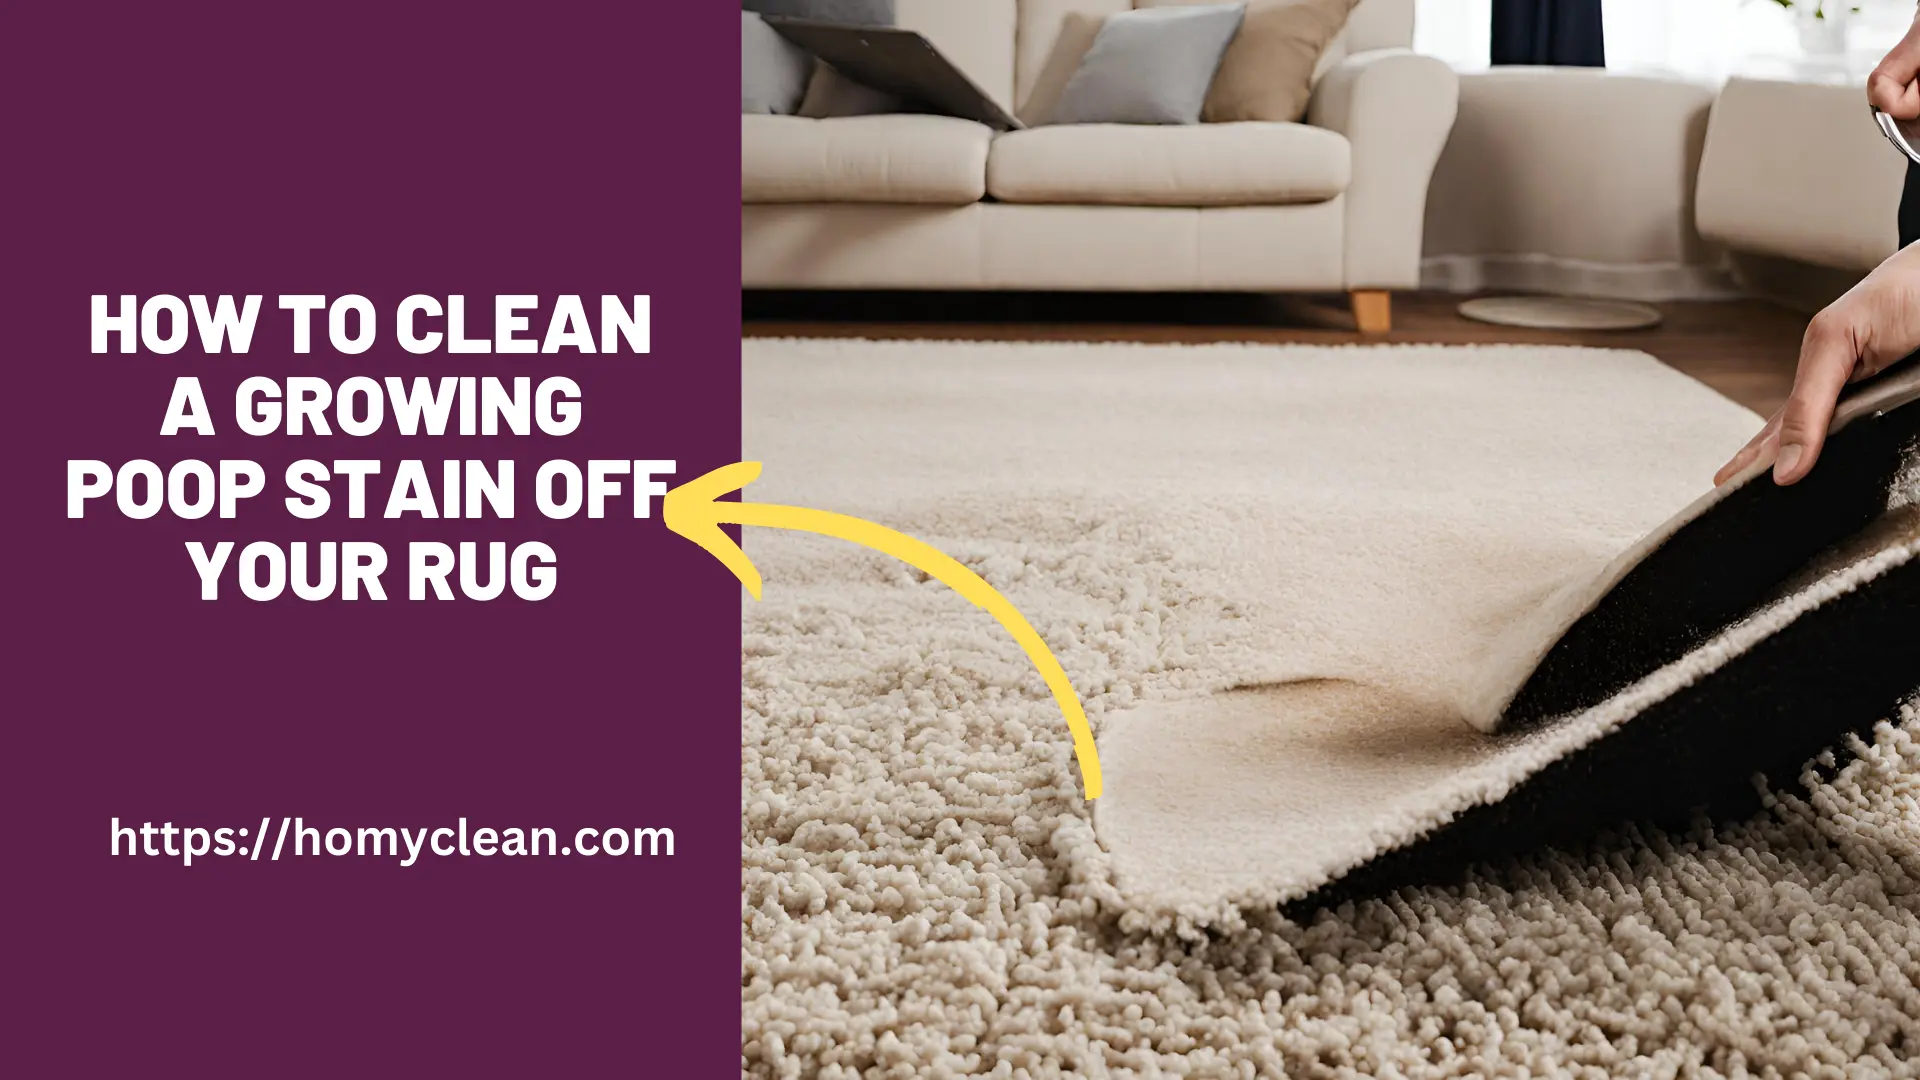 How to Clean a Growing Poop Stain Off Your Rug